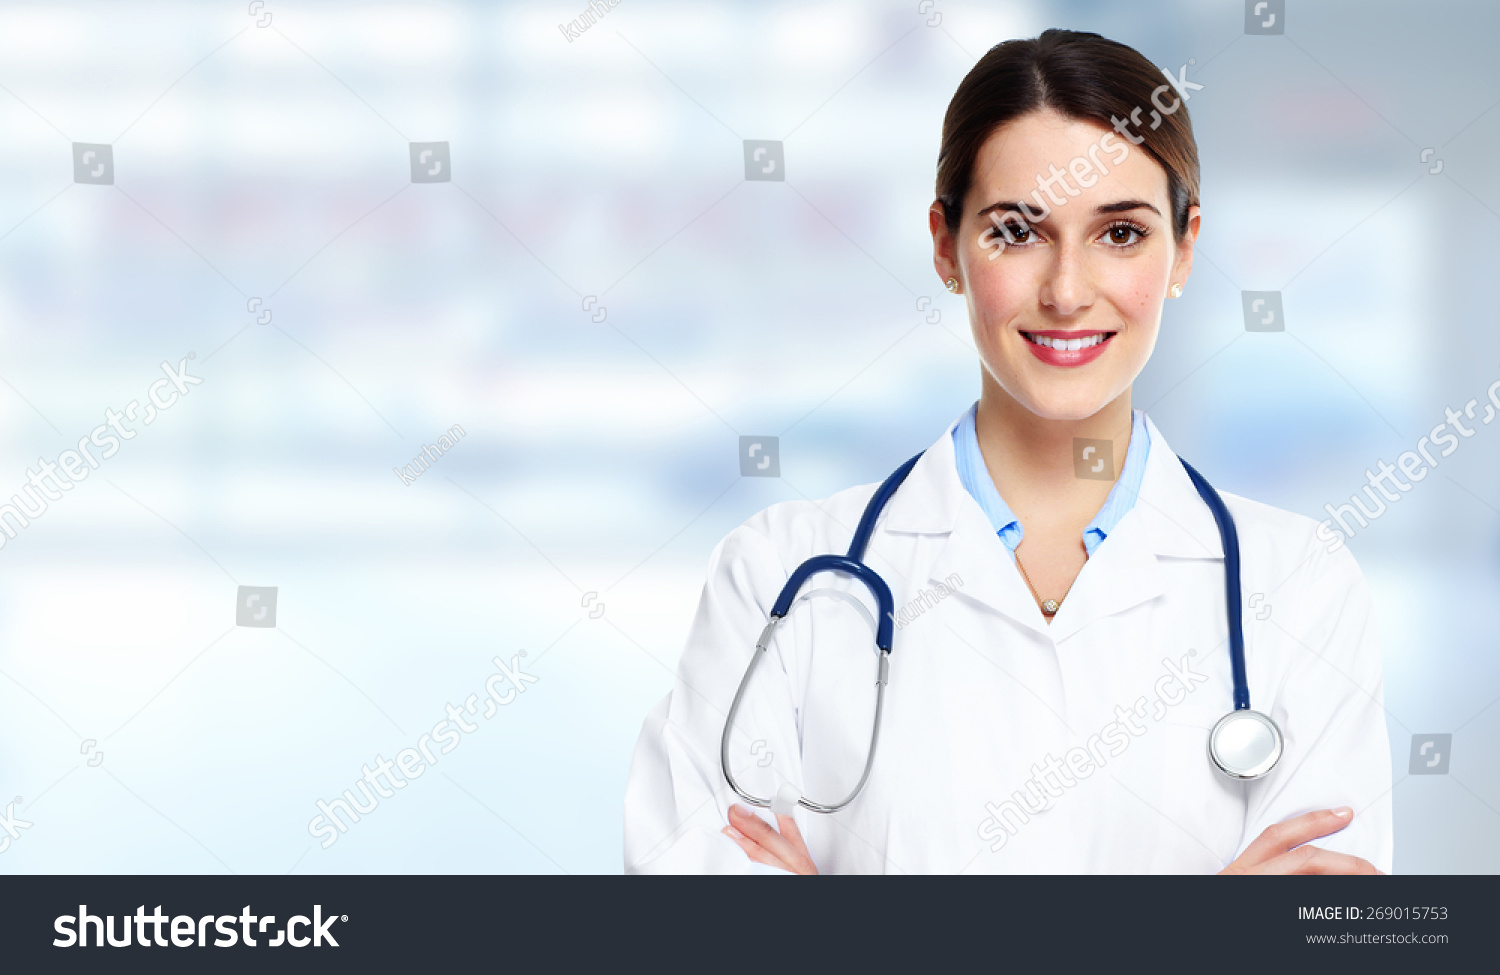 Medical Physician Doctor Woman Over Blue Stock Photo 269015753 ...